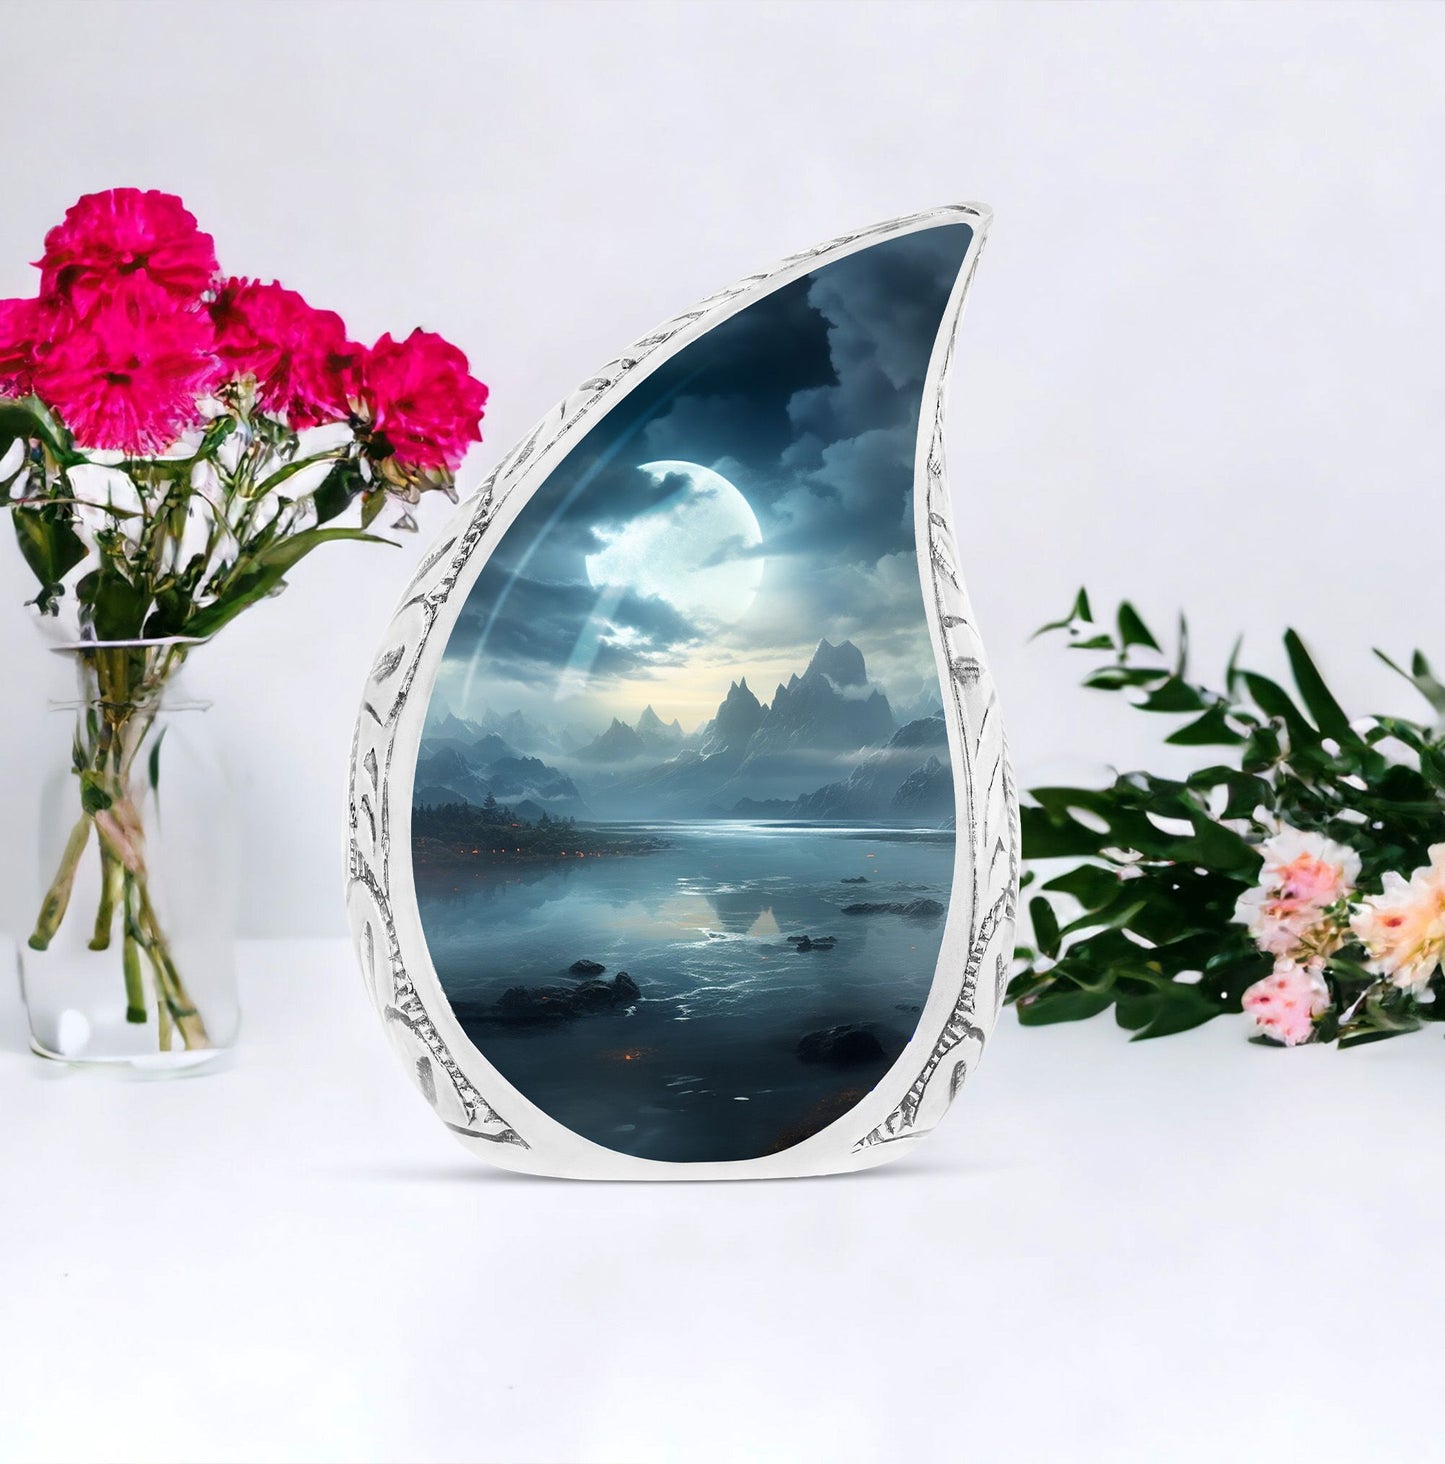 Medium-sized Moonlit Urns for men's ashes, suitable for funeral and burial purposes